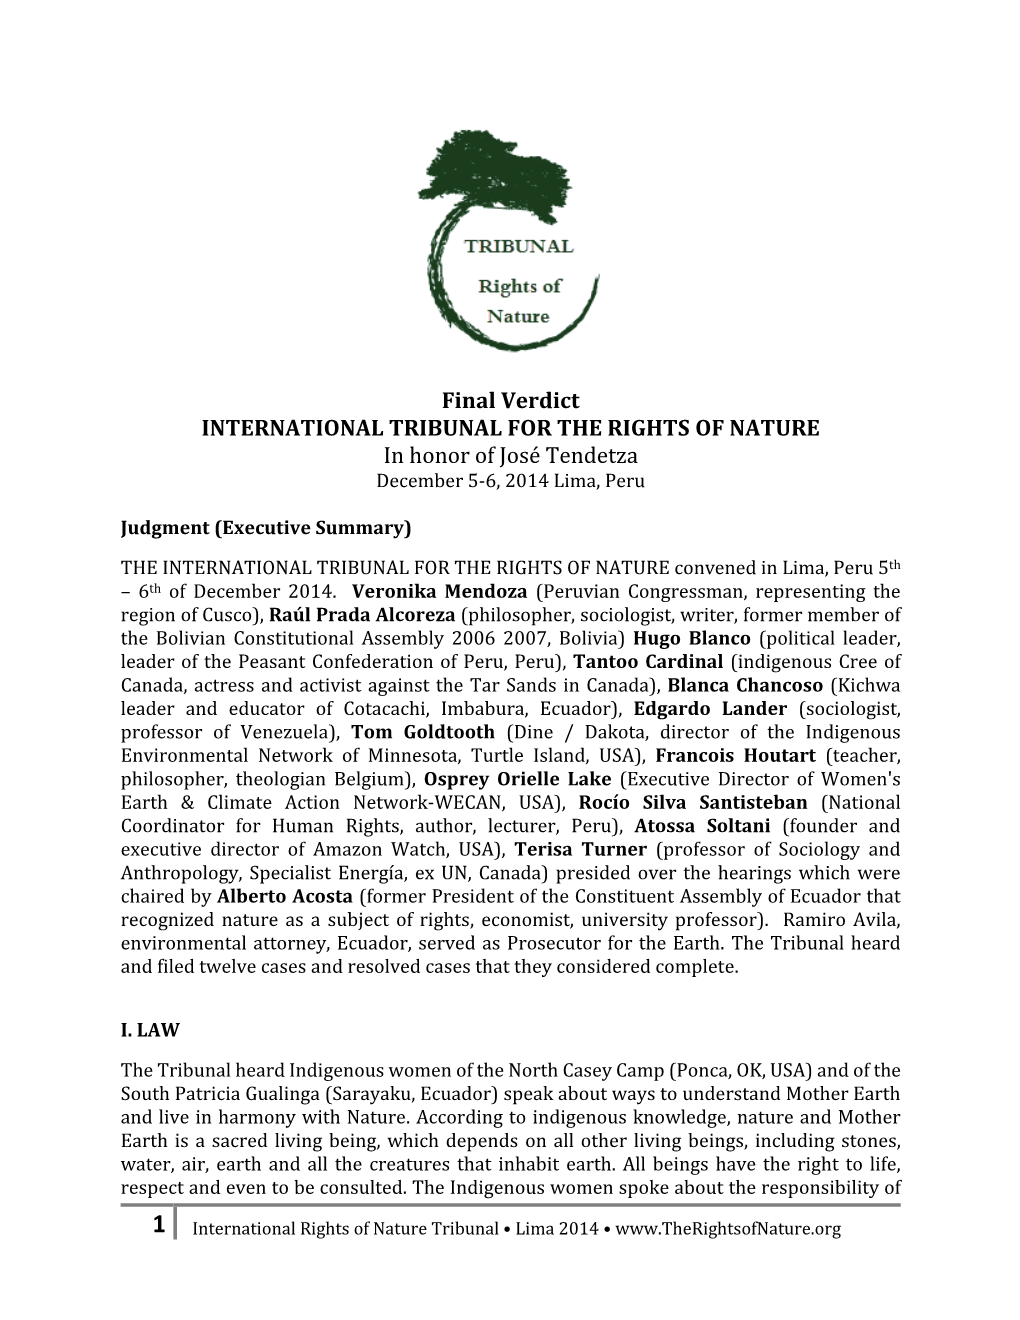 Final Verdict INTERNATIONAL TRIBUNAL for the RIGHTS of NATURE in Honor of José Tendetza December 5-6, 2014 Lima, Peru